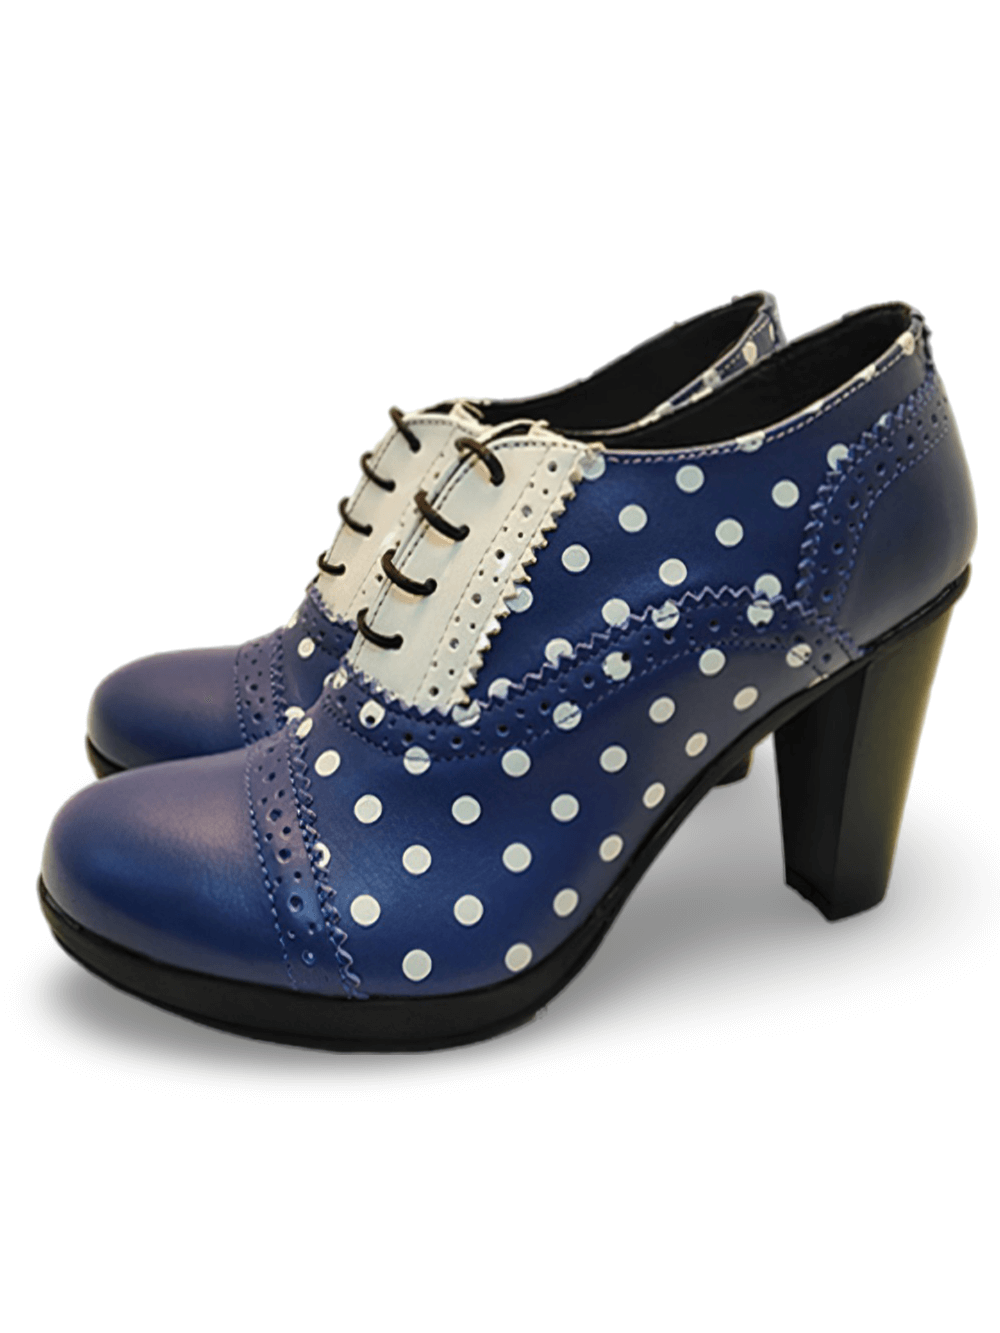 Elegant Women's Blue and White Lace-Up Heeled Booties